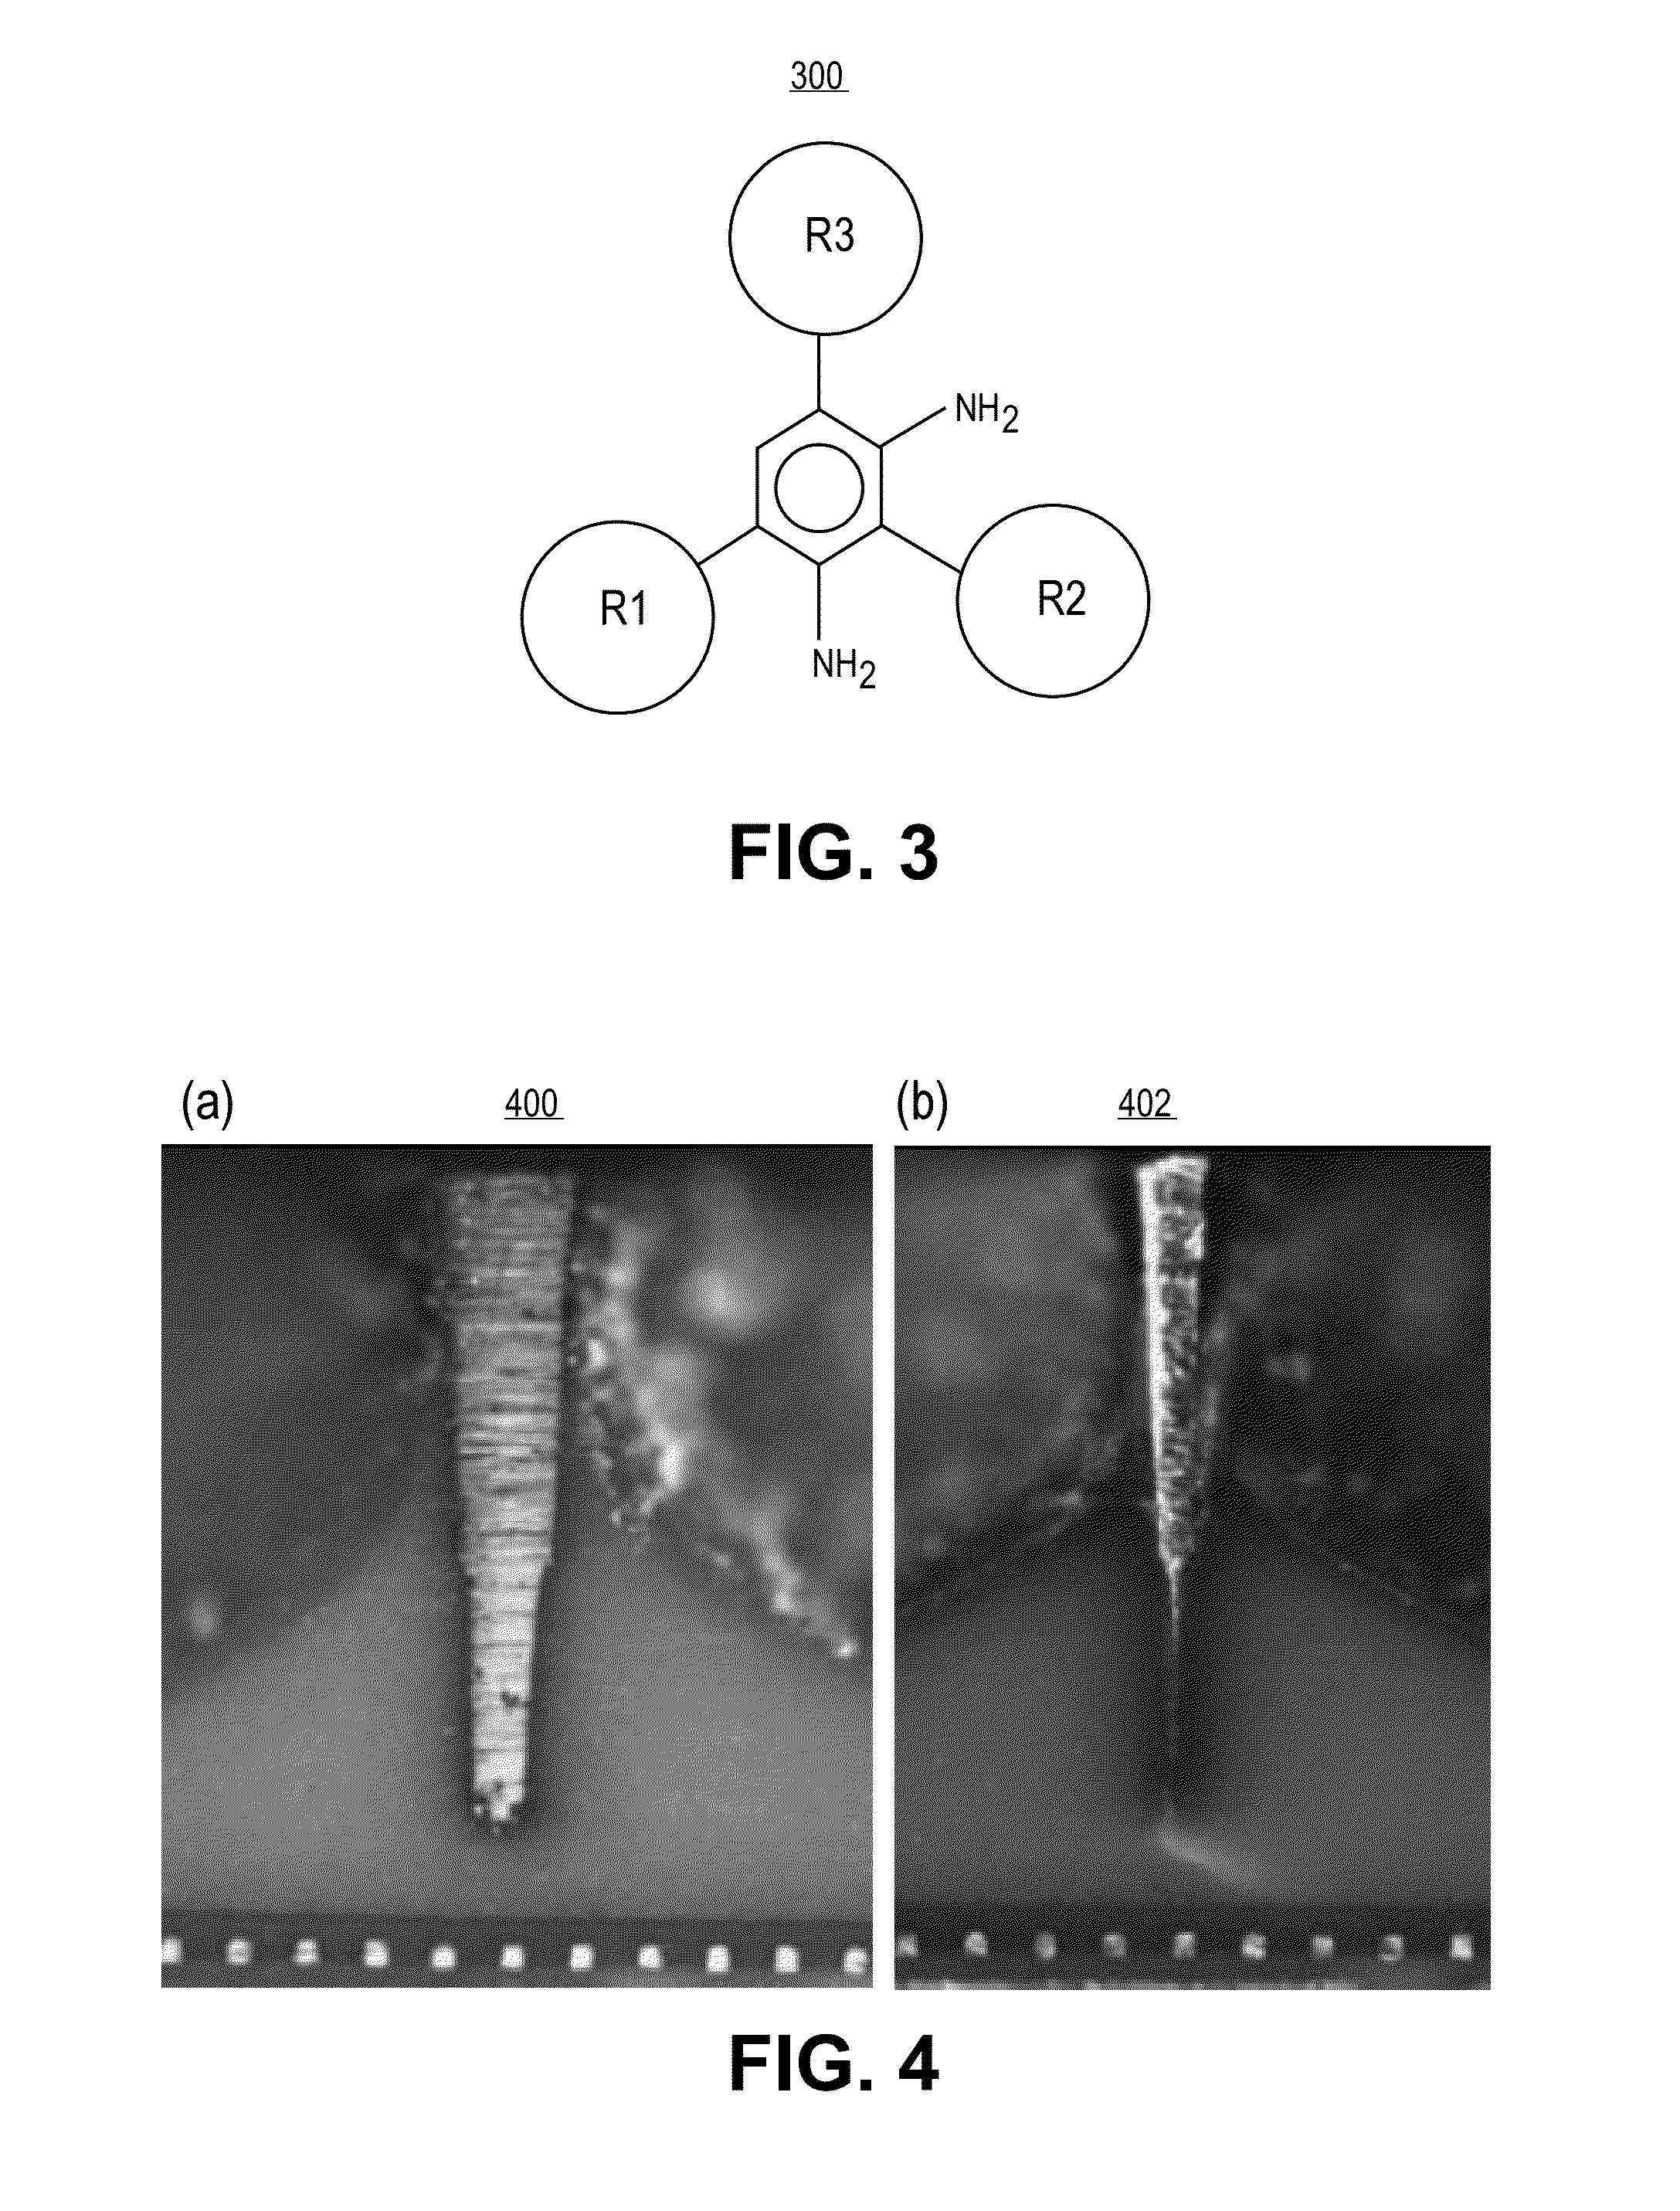 Epoxy-amine underfill materials for semiconductor packages